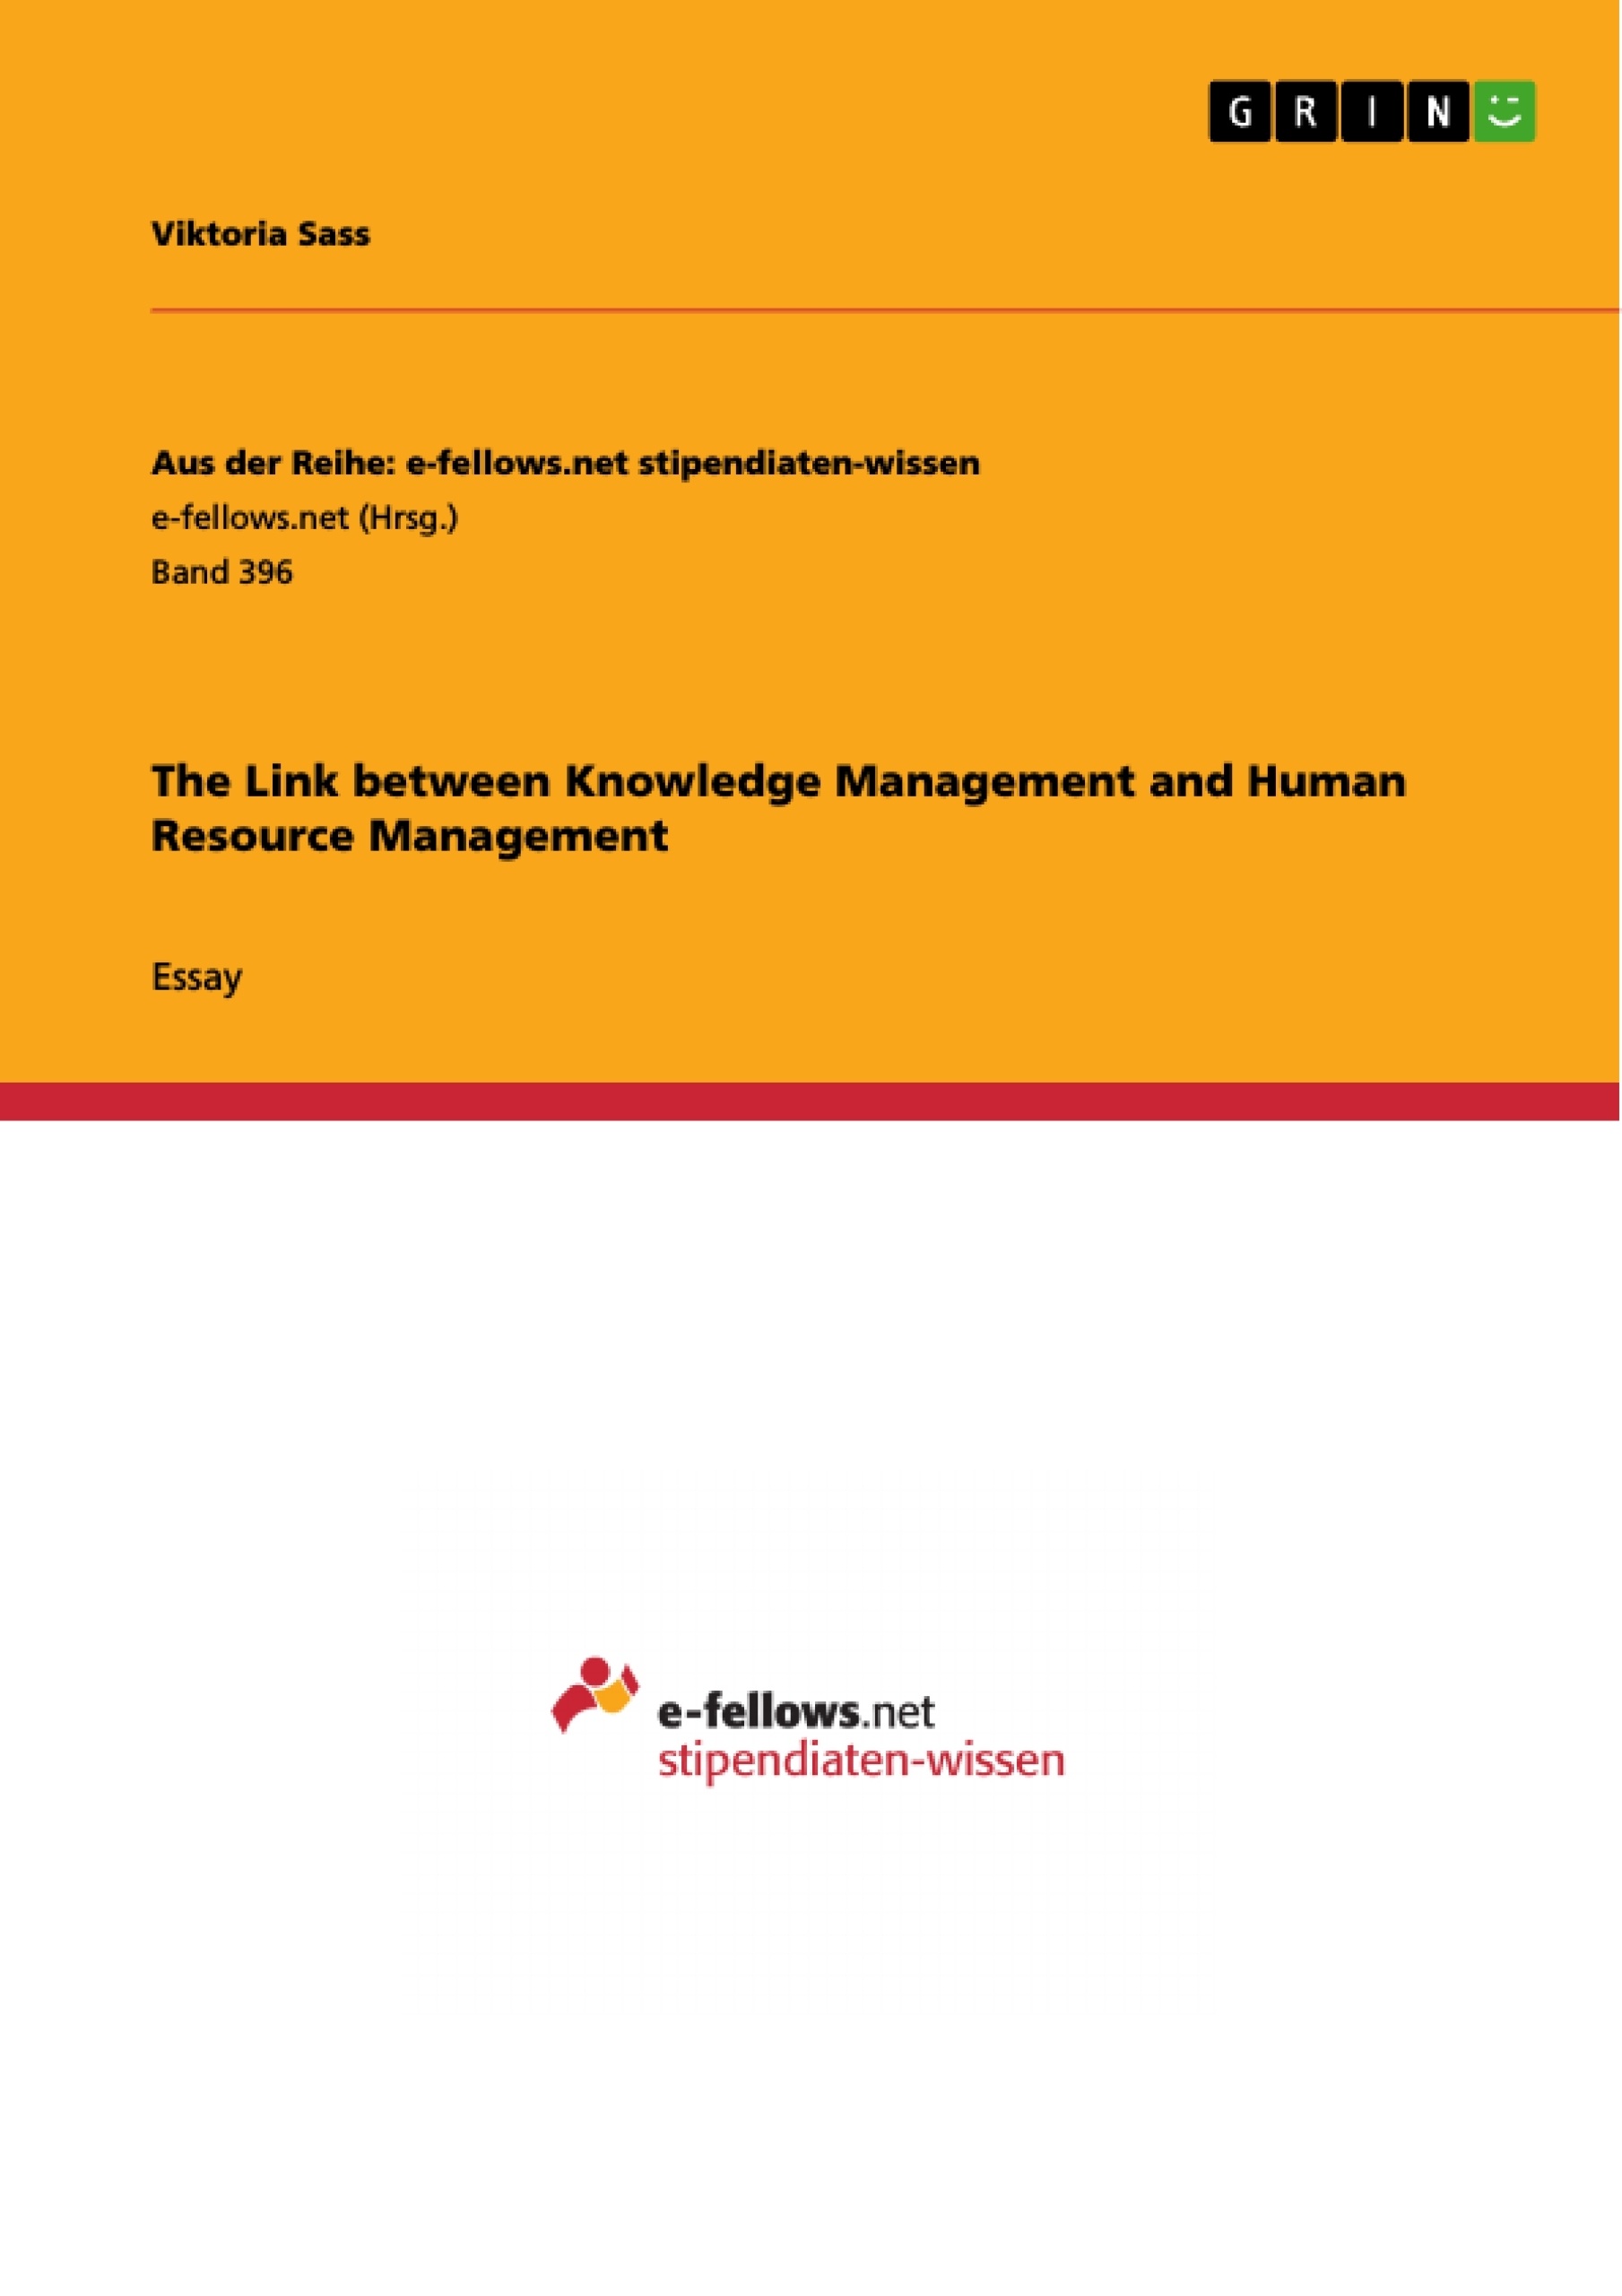 Title: The Link between Knowledge Management and Human Resource Management